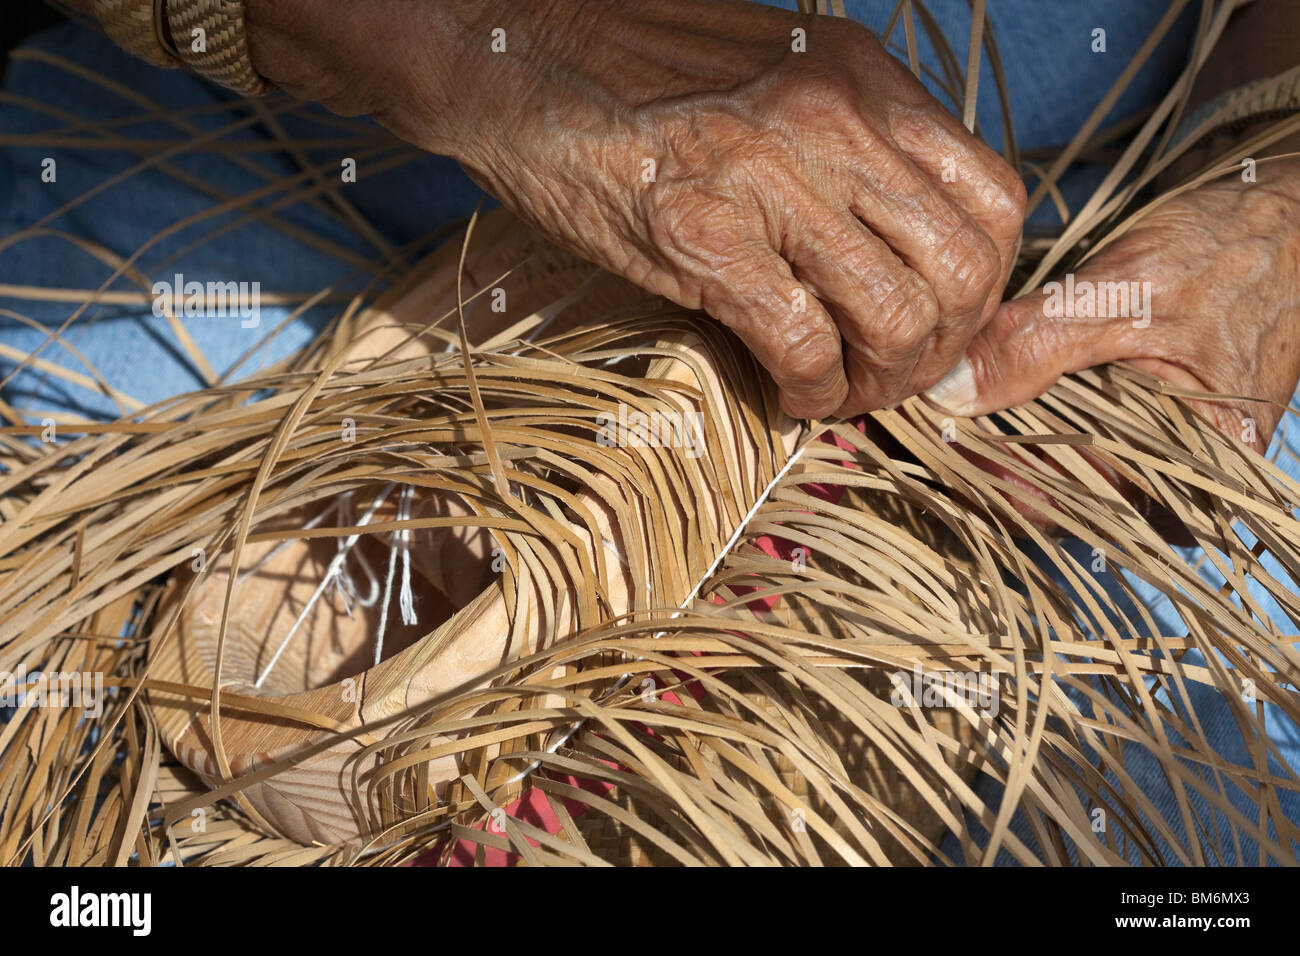 Master weaver at work on lauhala hat in Hawaii Stock Photo